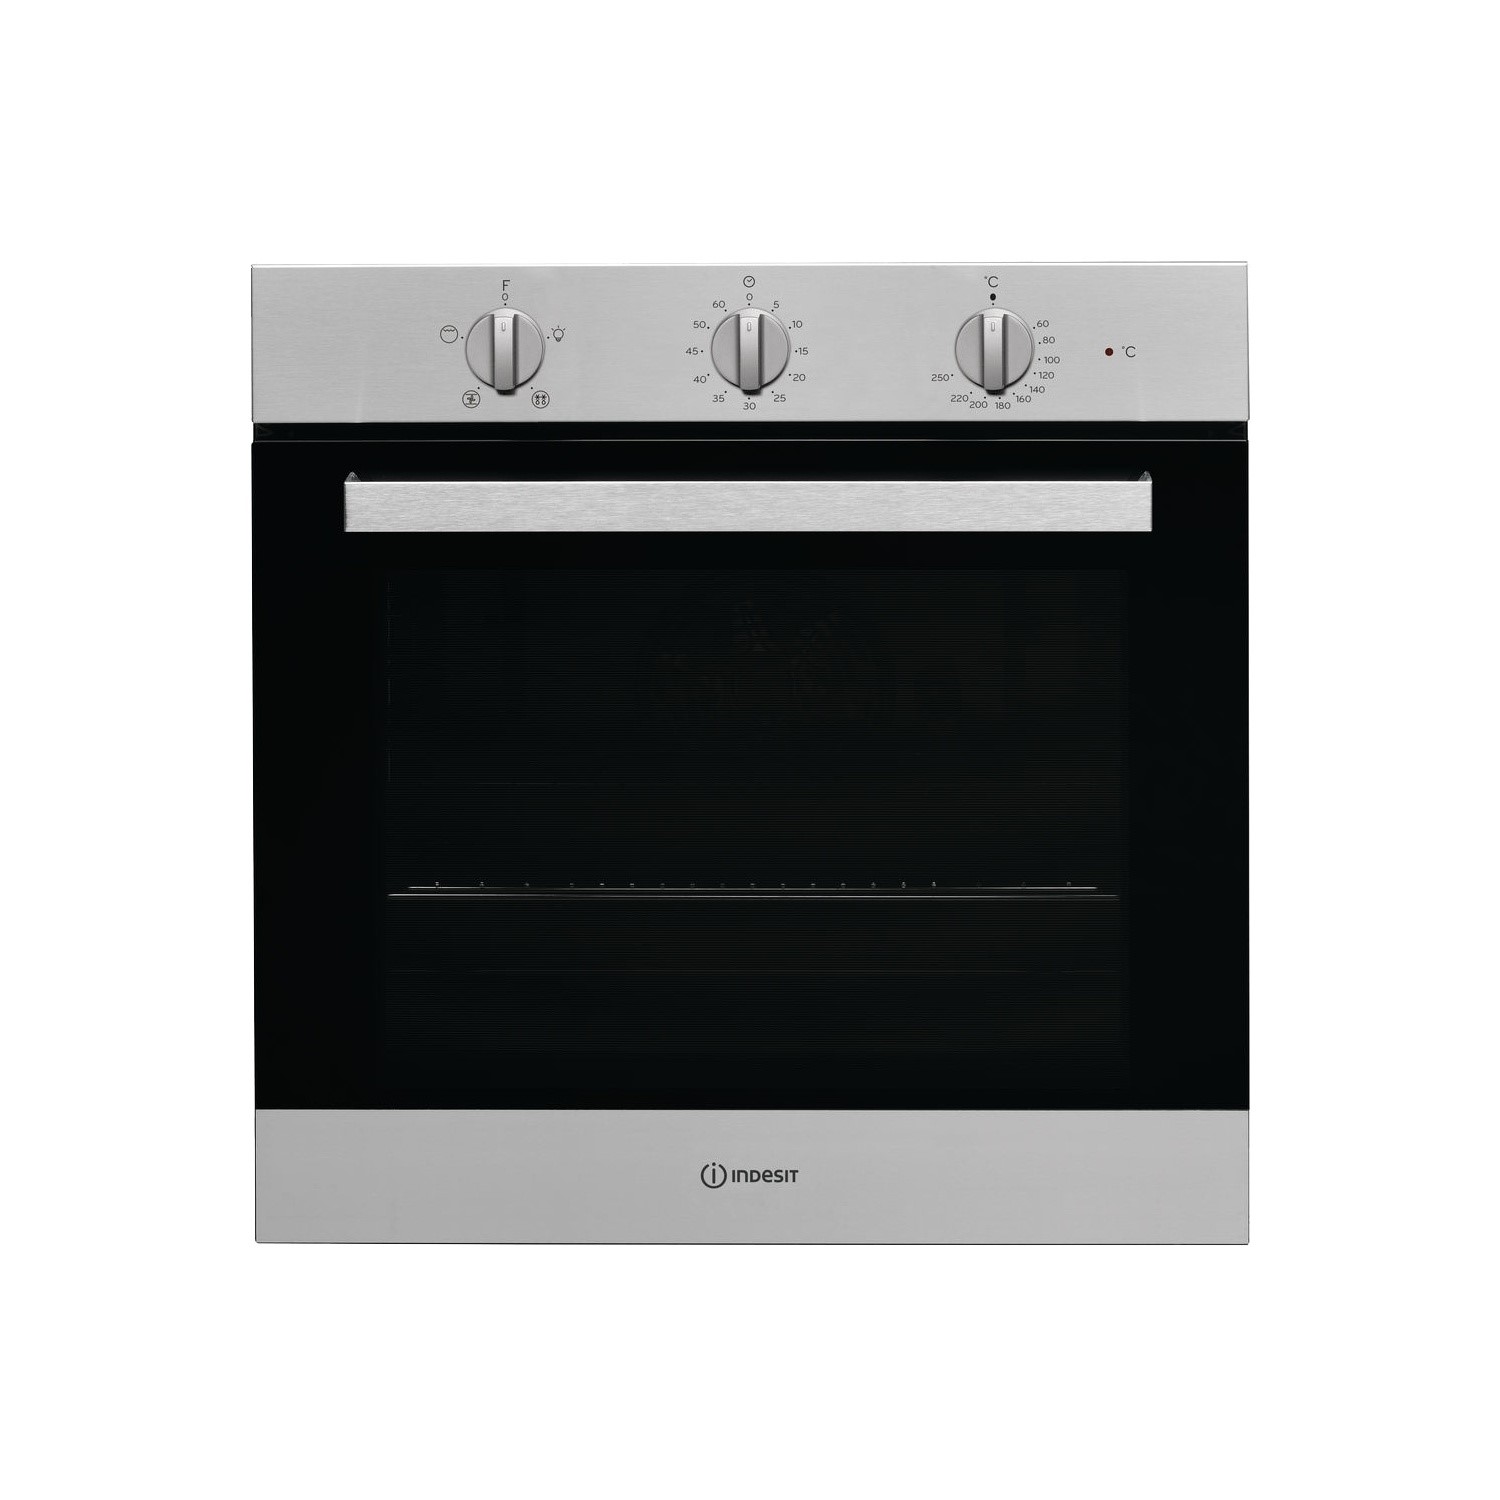 Refurbished Indesit Aria IFW6330IX 60cm Single Built In Electric Oven Stainless Steel